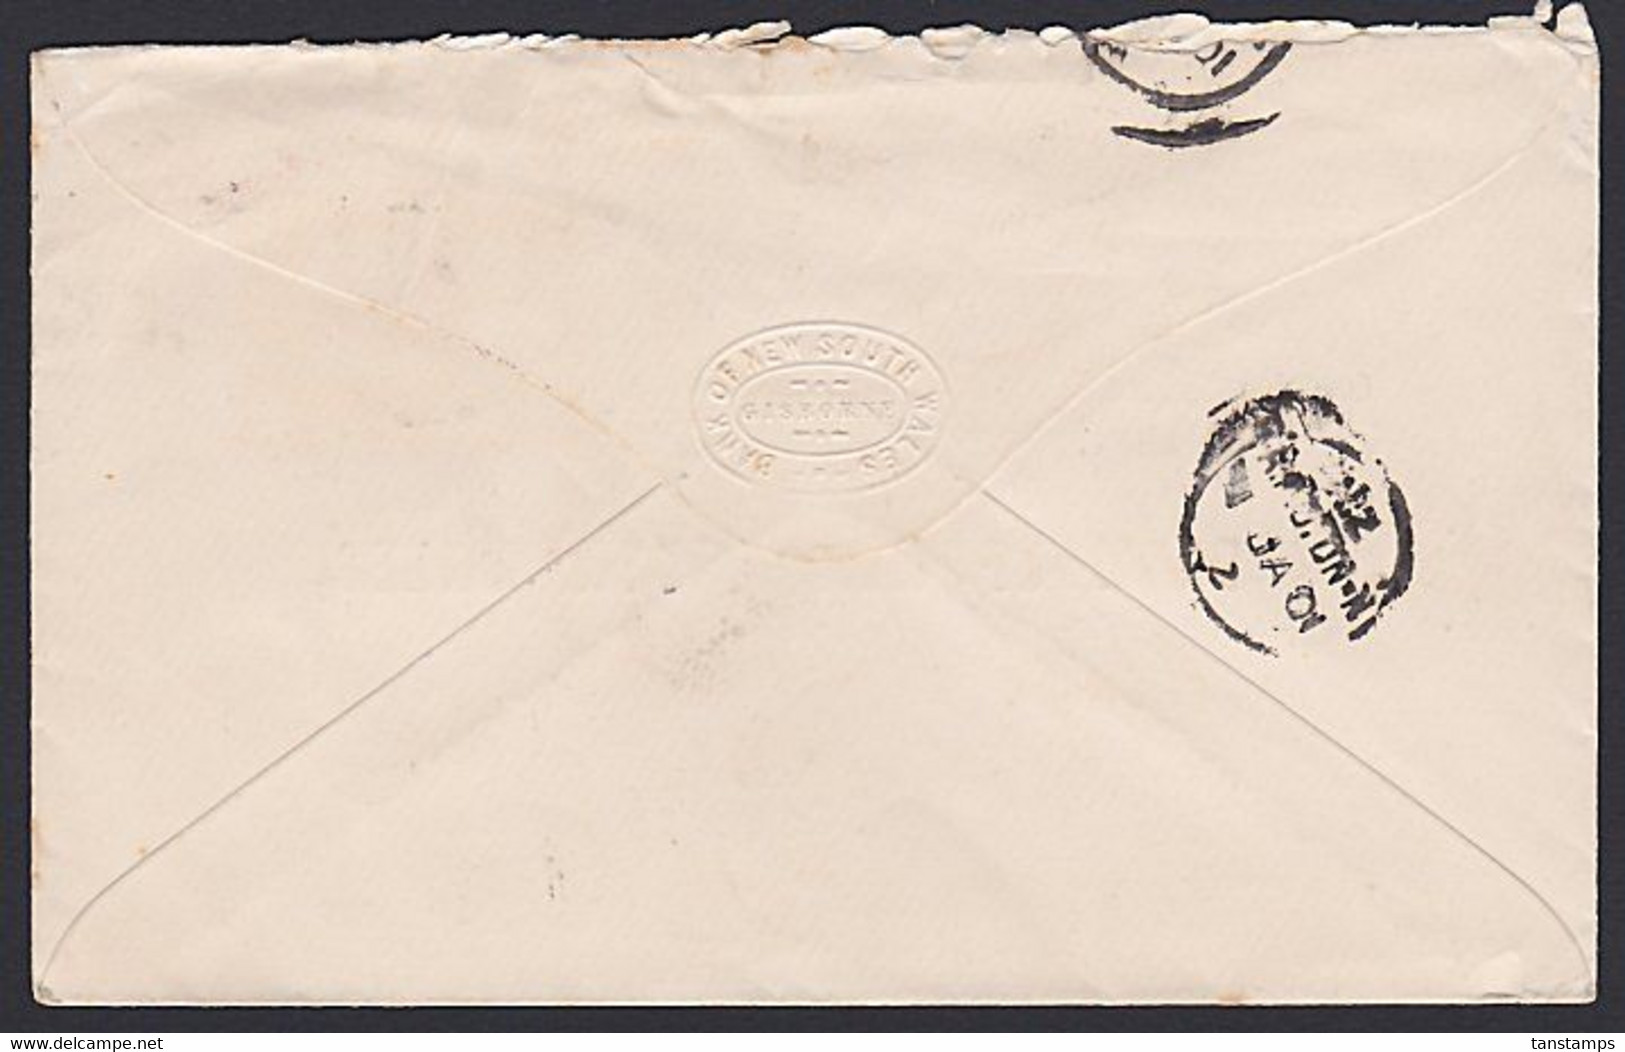 NEW ZEALAND 1900 2d PEMBROKE PAIR LOCAL PRINT RPO DN-N COMMERCIAL BANK COVER - Covers & Documents